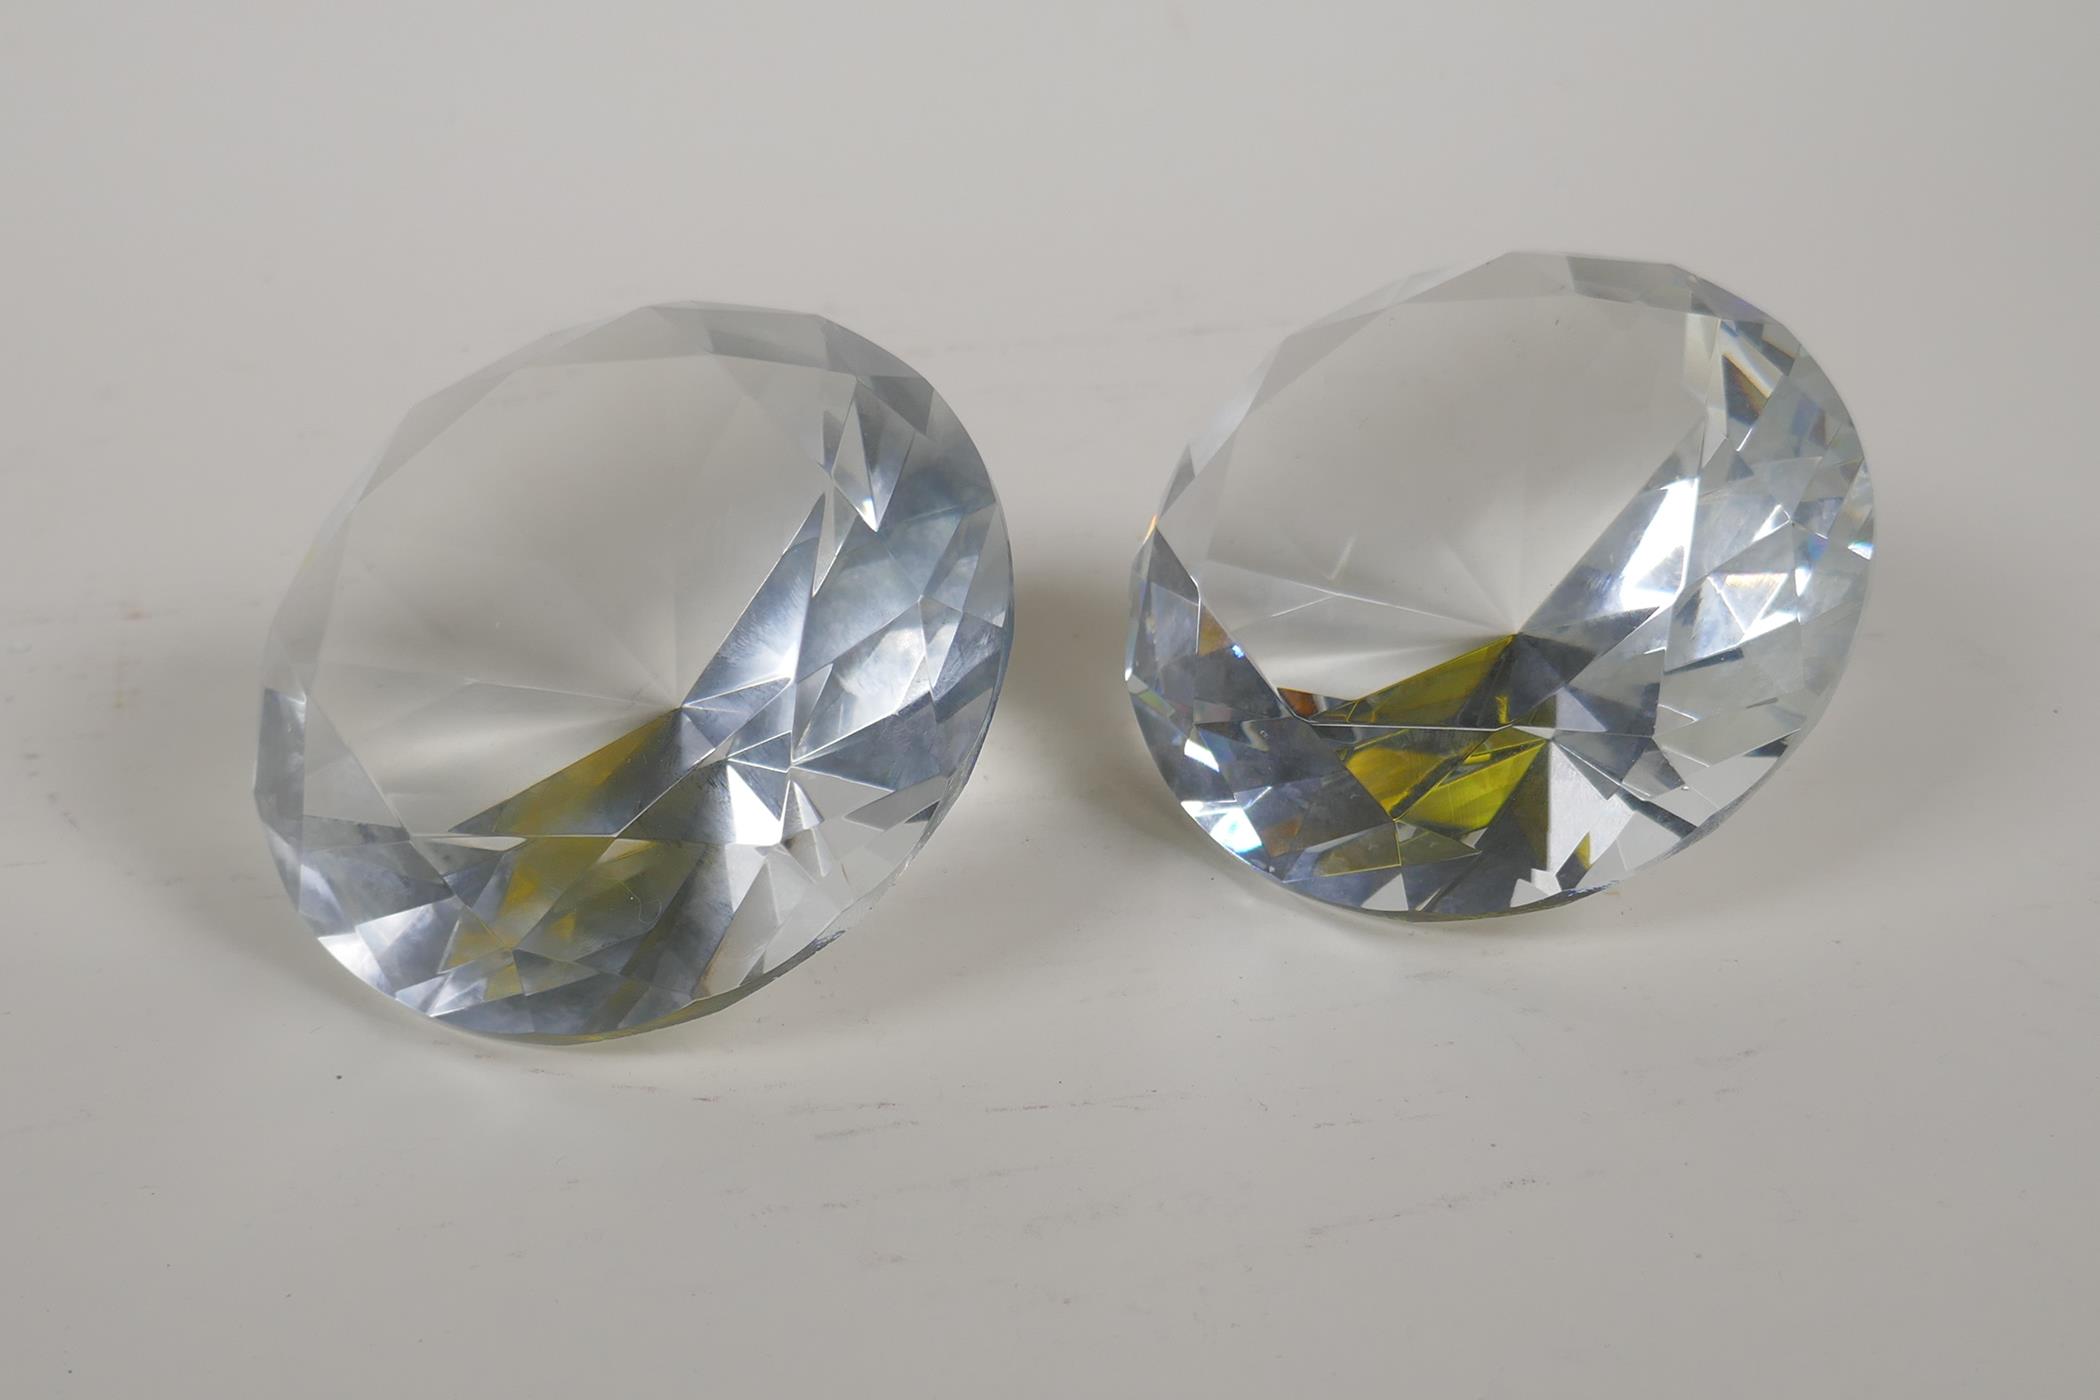 A pair of diamond shaped glass paperweights, 4" diameter - Image 4 of 4